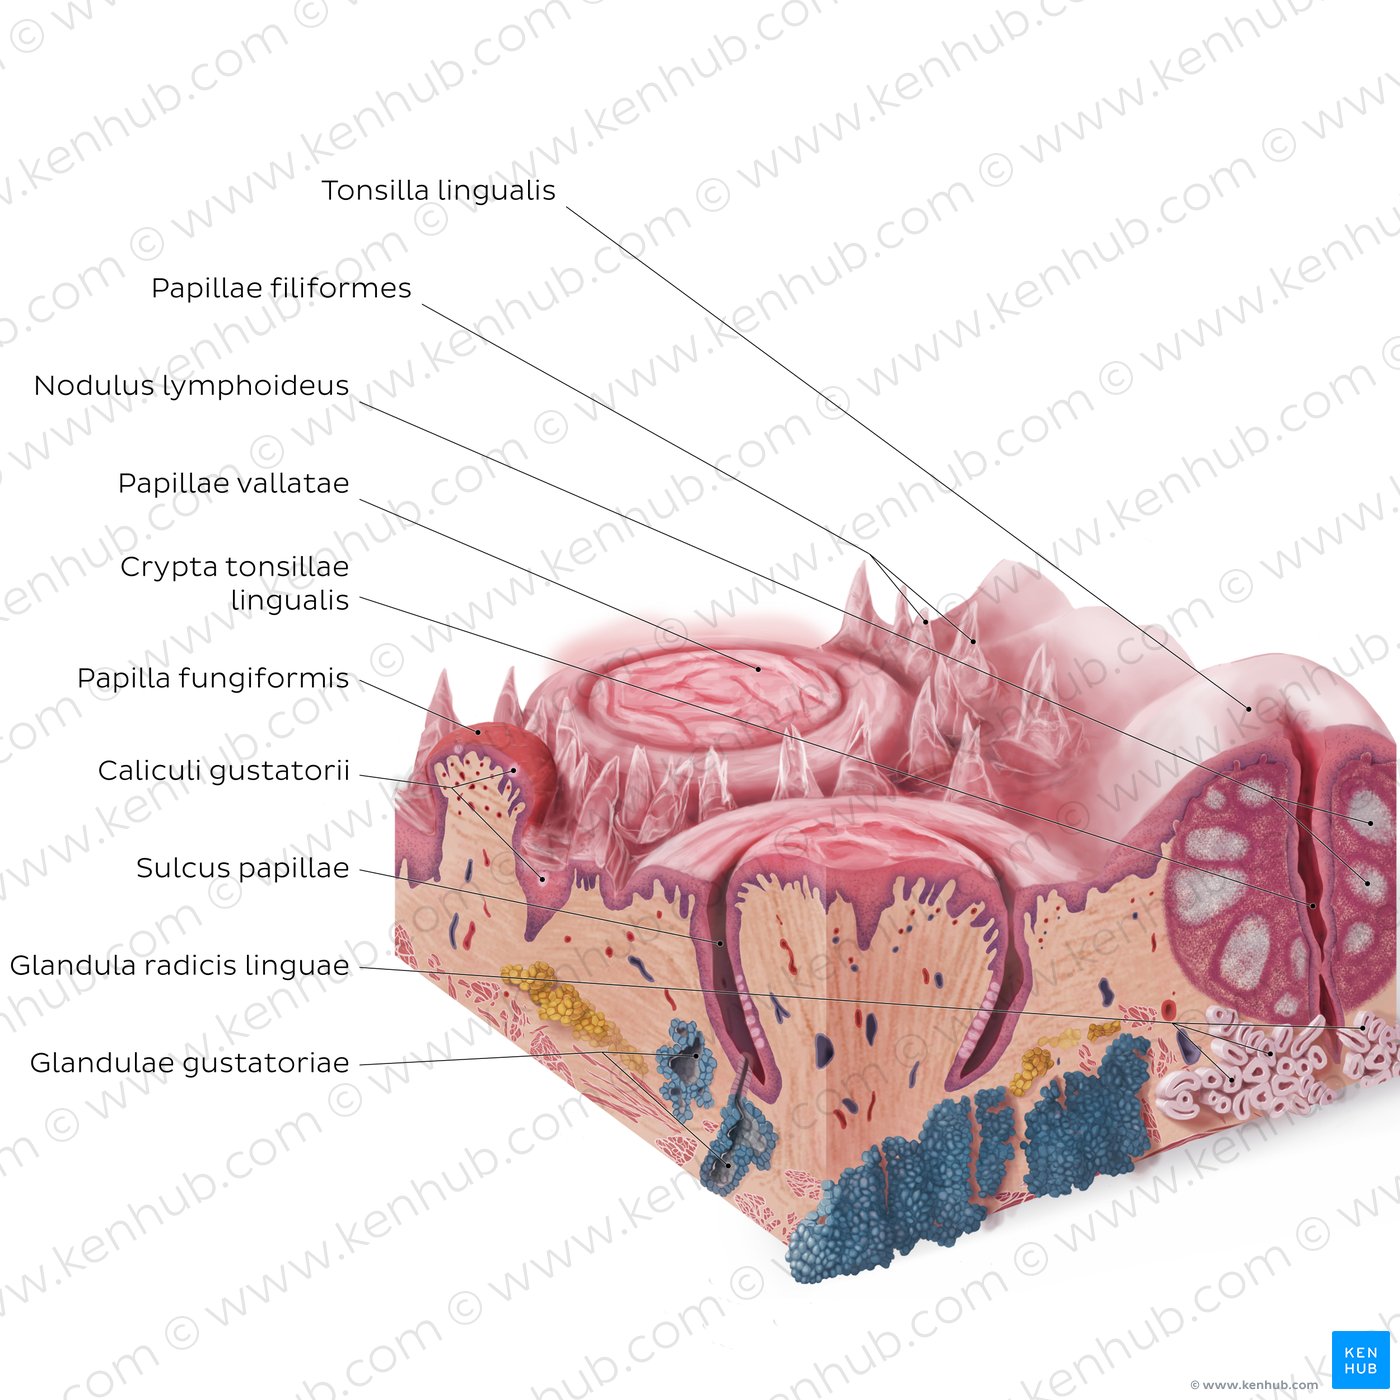 Papillae linguales: medial section